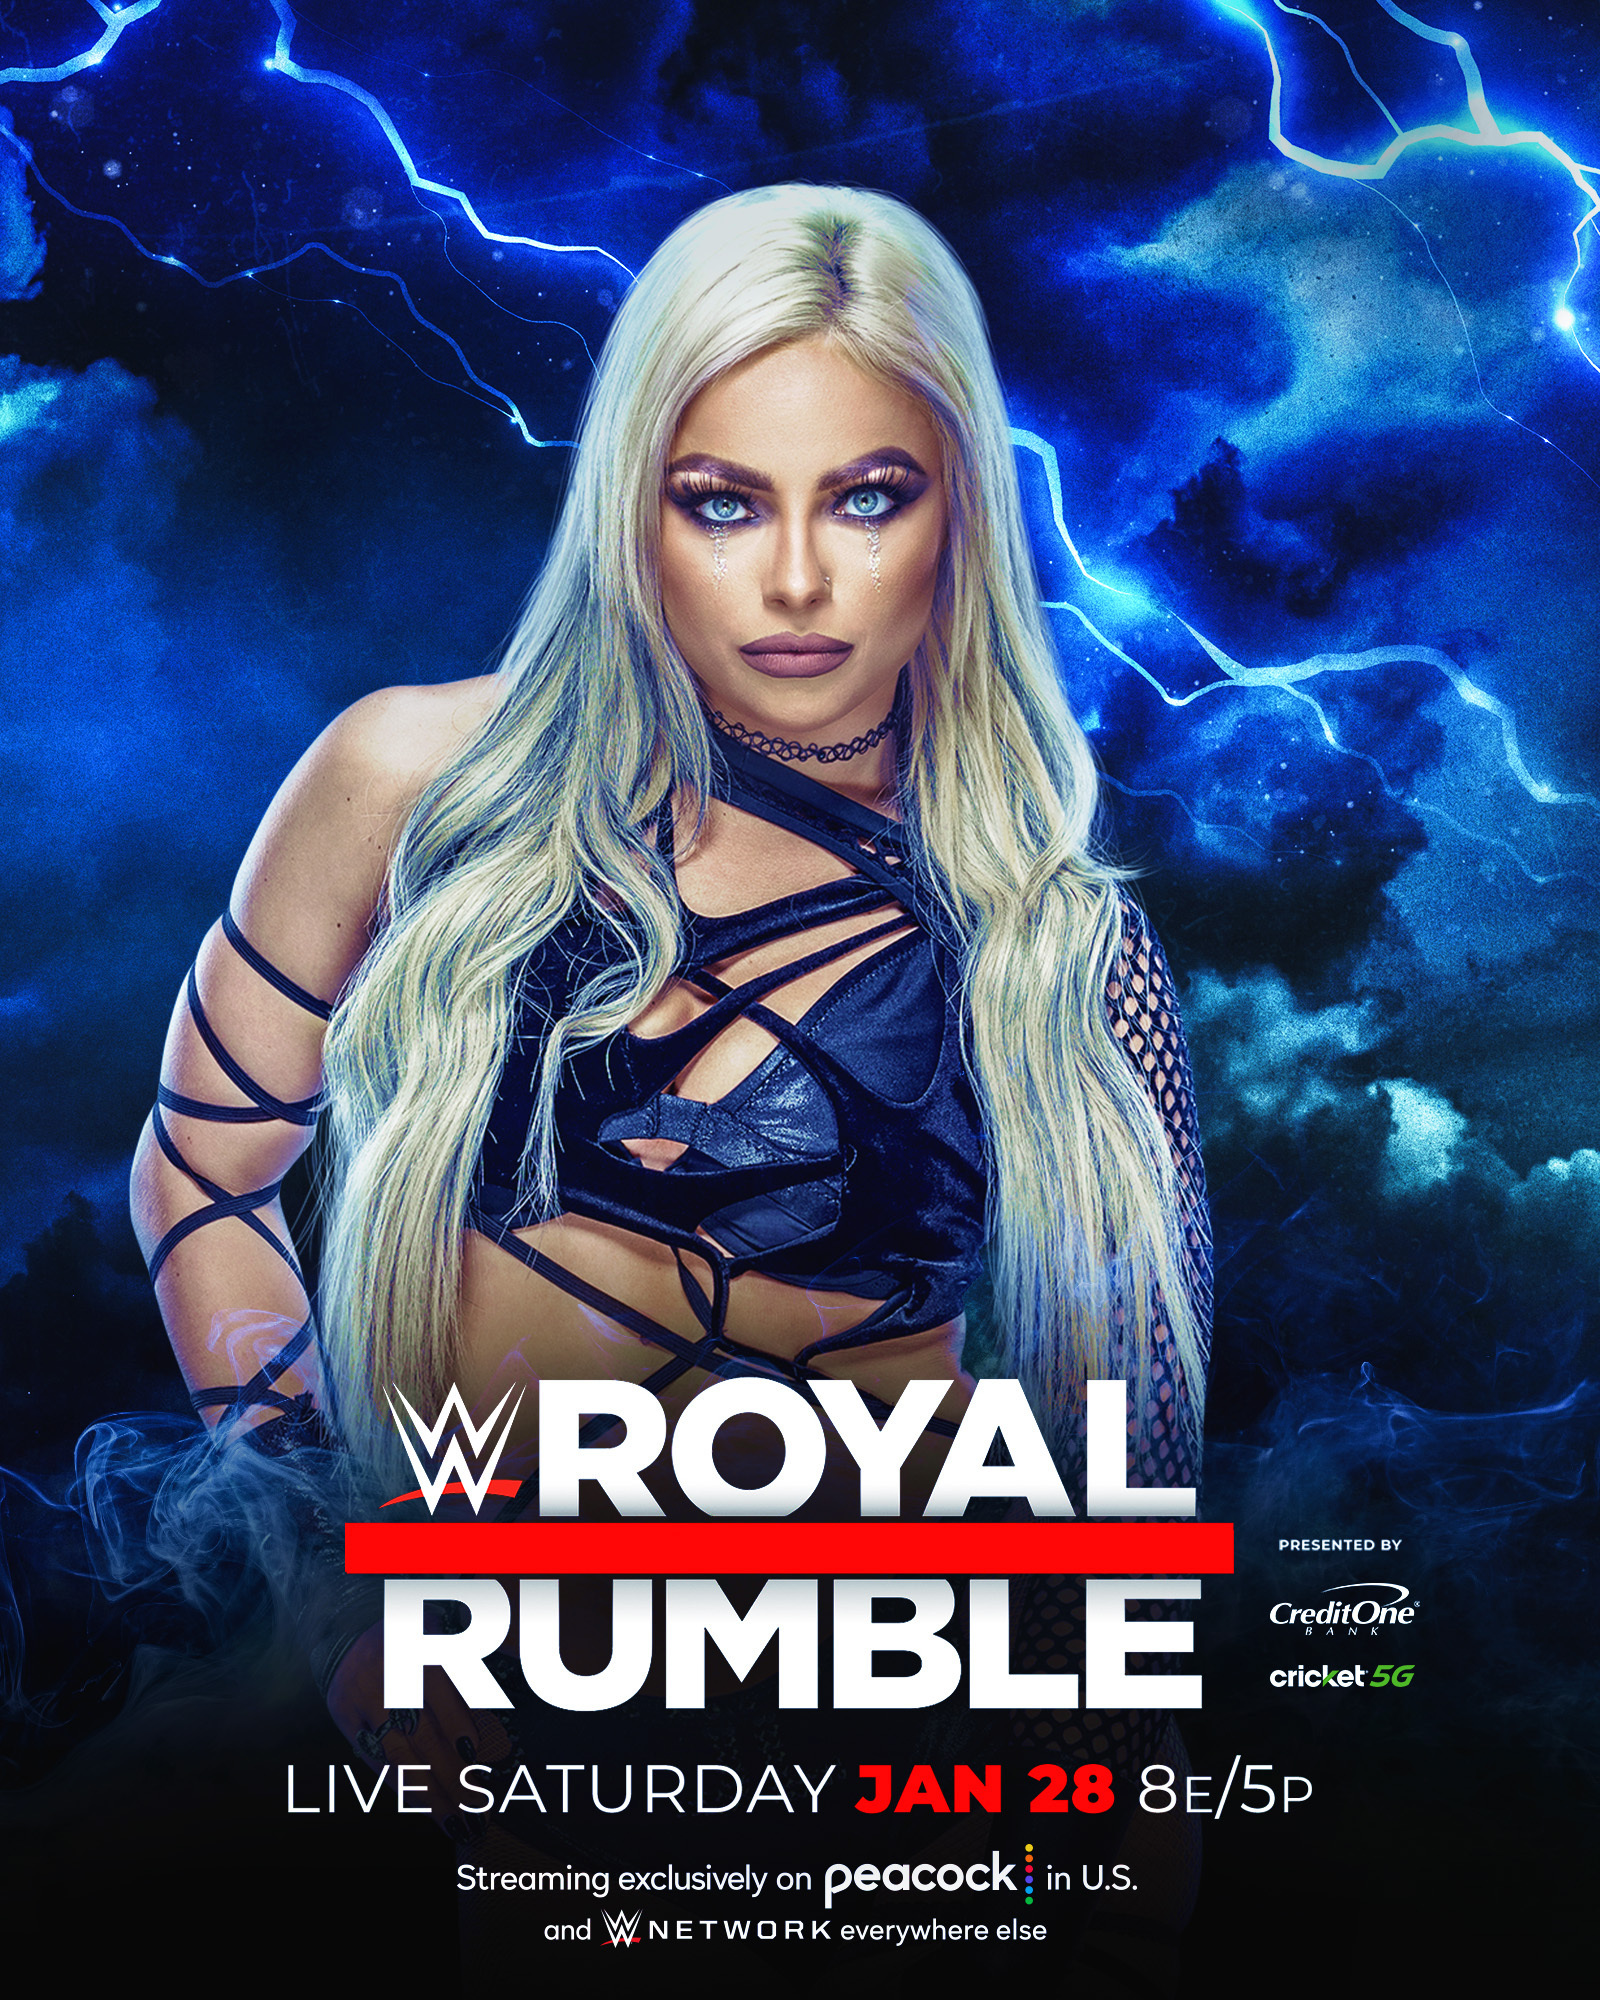 WWE - #RoyalRumble is coming up fast! announced tonight that she will be competing with 29 other women for the opportunity to main event #WrestleMania!